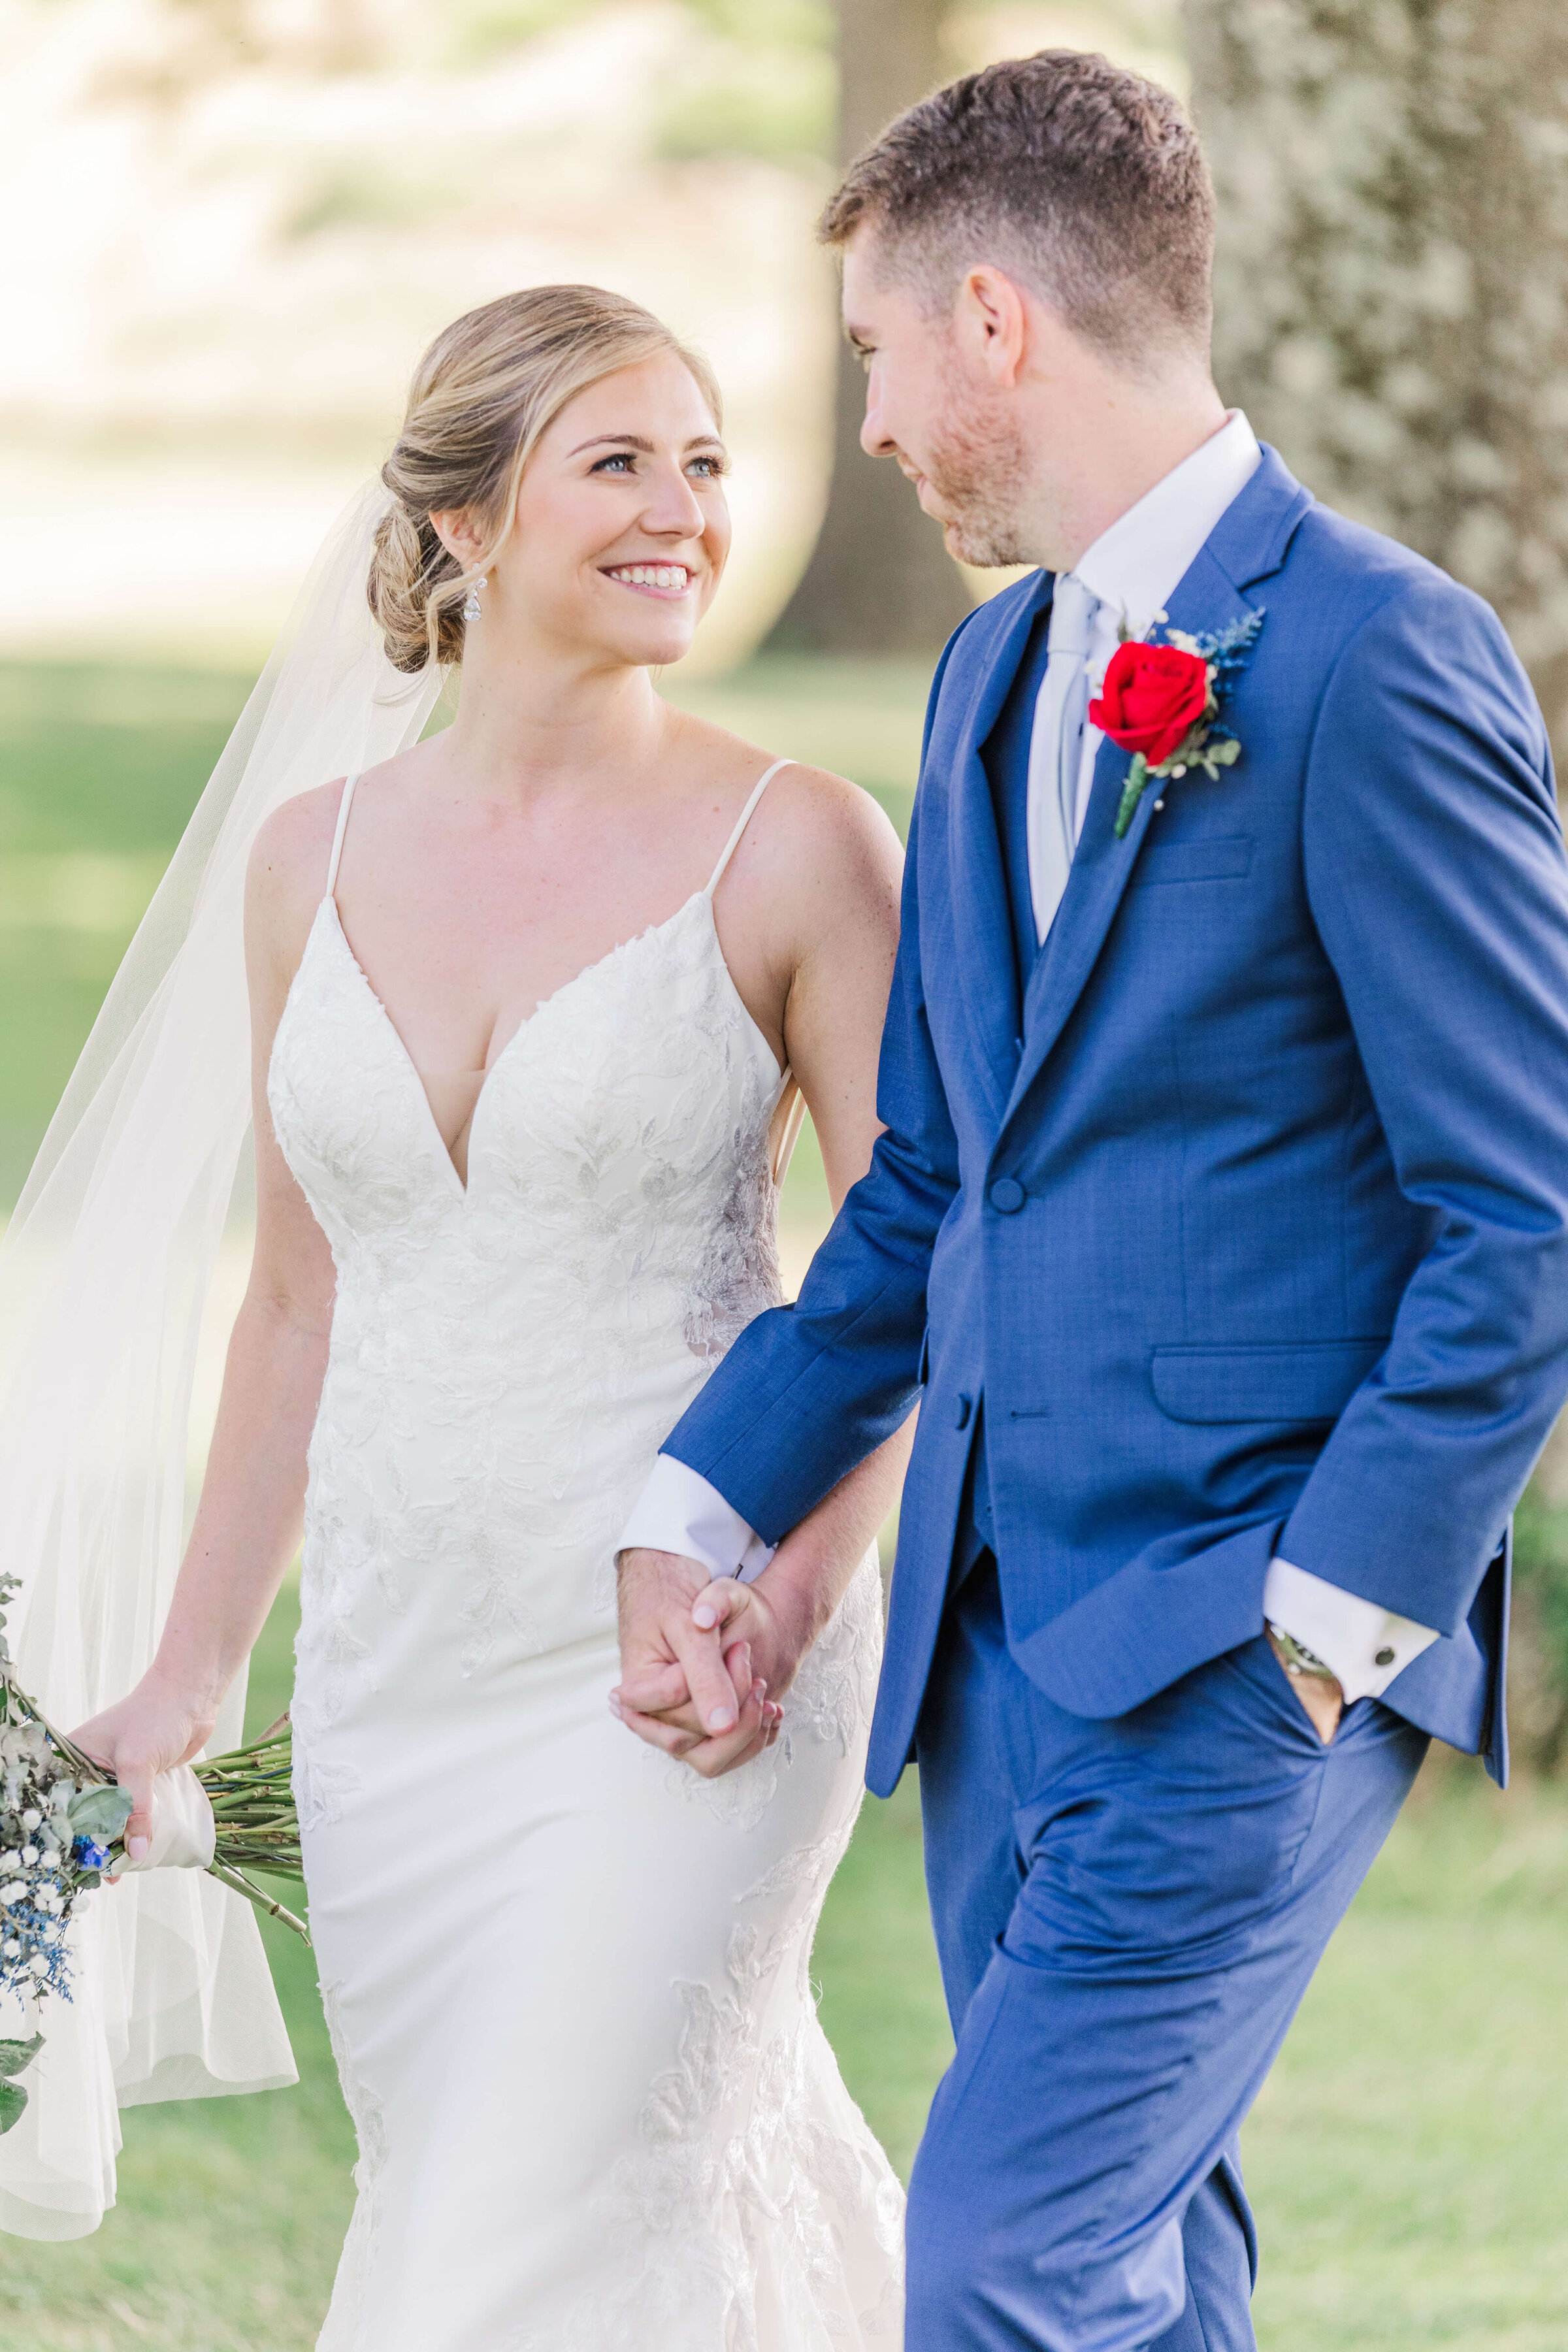 A bride and groom walk and hold hands looking at each other. Around them the grass and trees are really green. He's wearing a blue tux and she's holding a red, white, and blue bouquet